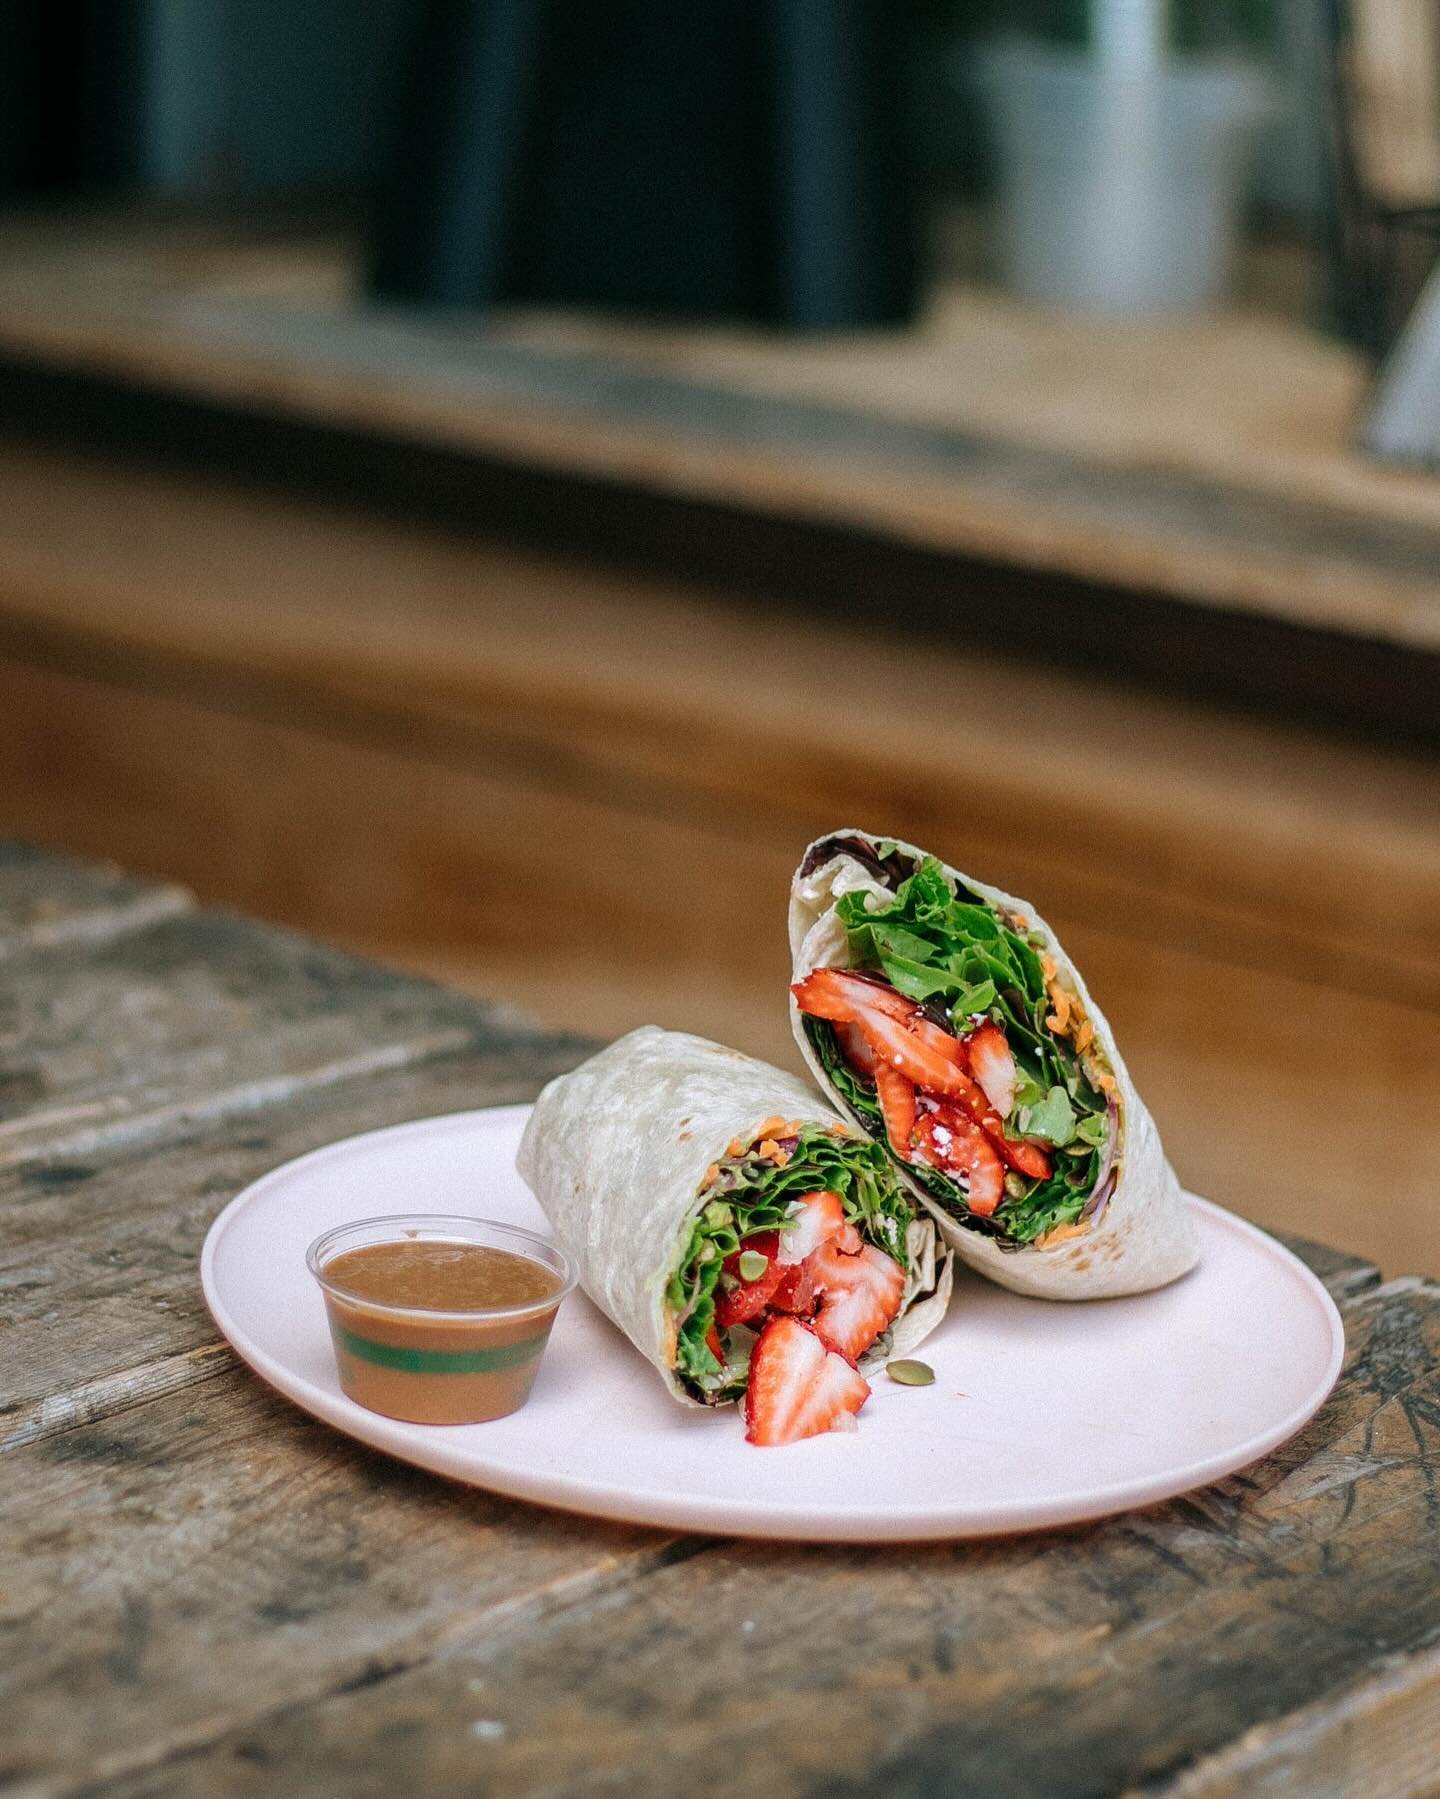 Your last chance to order any of your Spring Favorites on our menu!🍓😍
June 1st we change out our seasonal menu for our Summer highlights! 🥳But before then make sure you get the chance to try our Strawberry Feta Wrap! ✨This wrap has our mixed green